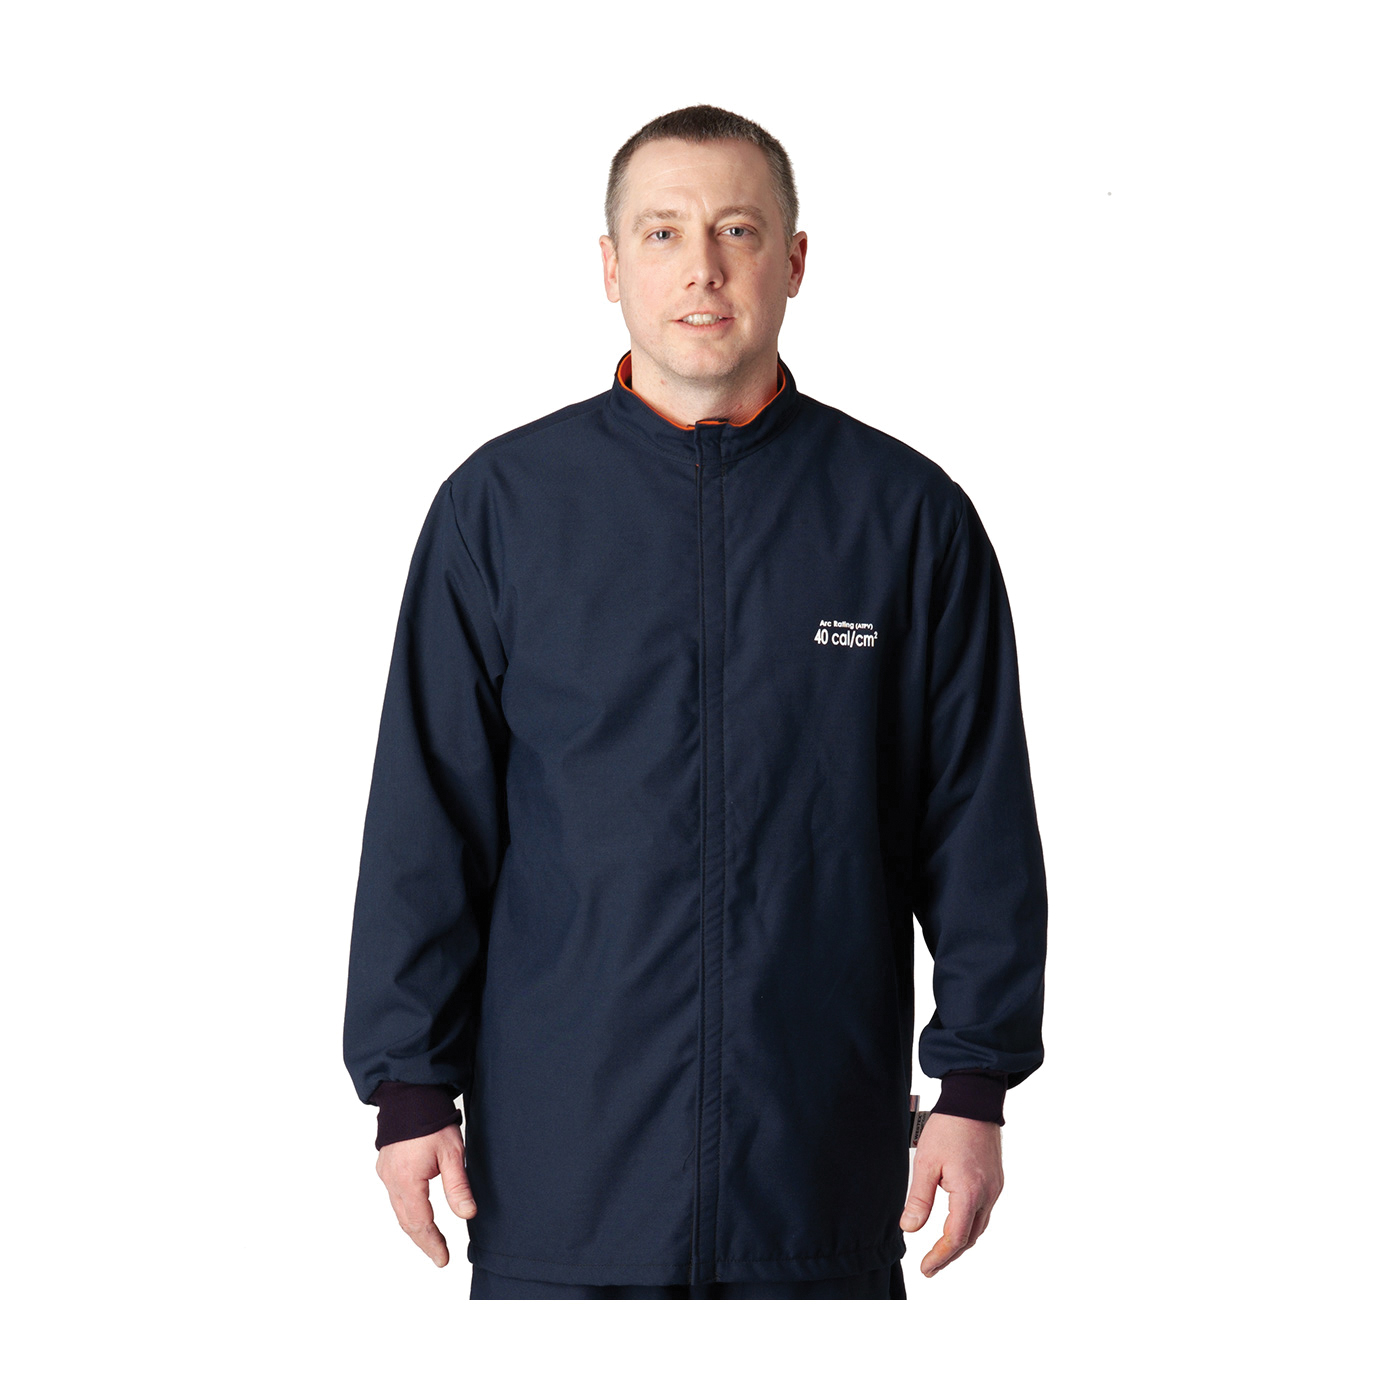 PIP® 9100-524ULT/XL Ultra Light Arc and Flame Resistant Jacket, XL, Navy Blue, DuPont™ Protera®/Westex® Ultrasoft, 48 to 50 in Chest, Resists: Arc and Flame, ASTM F1506-10a, ASTM F2178-12